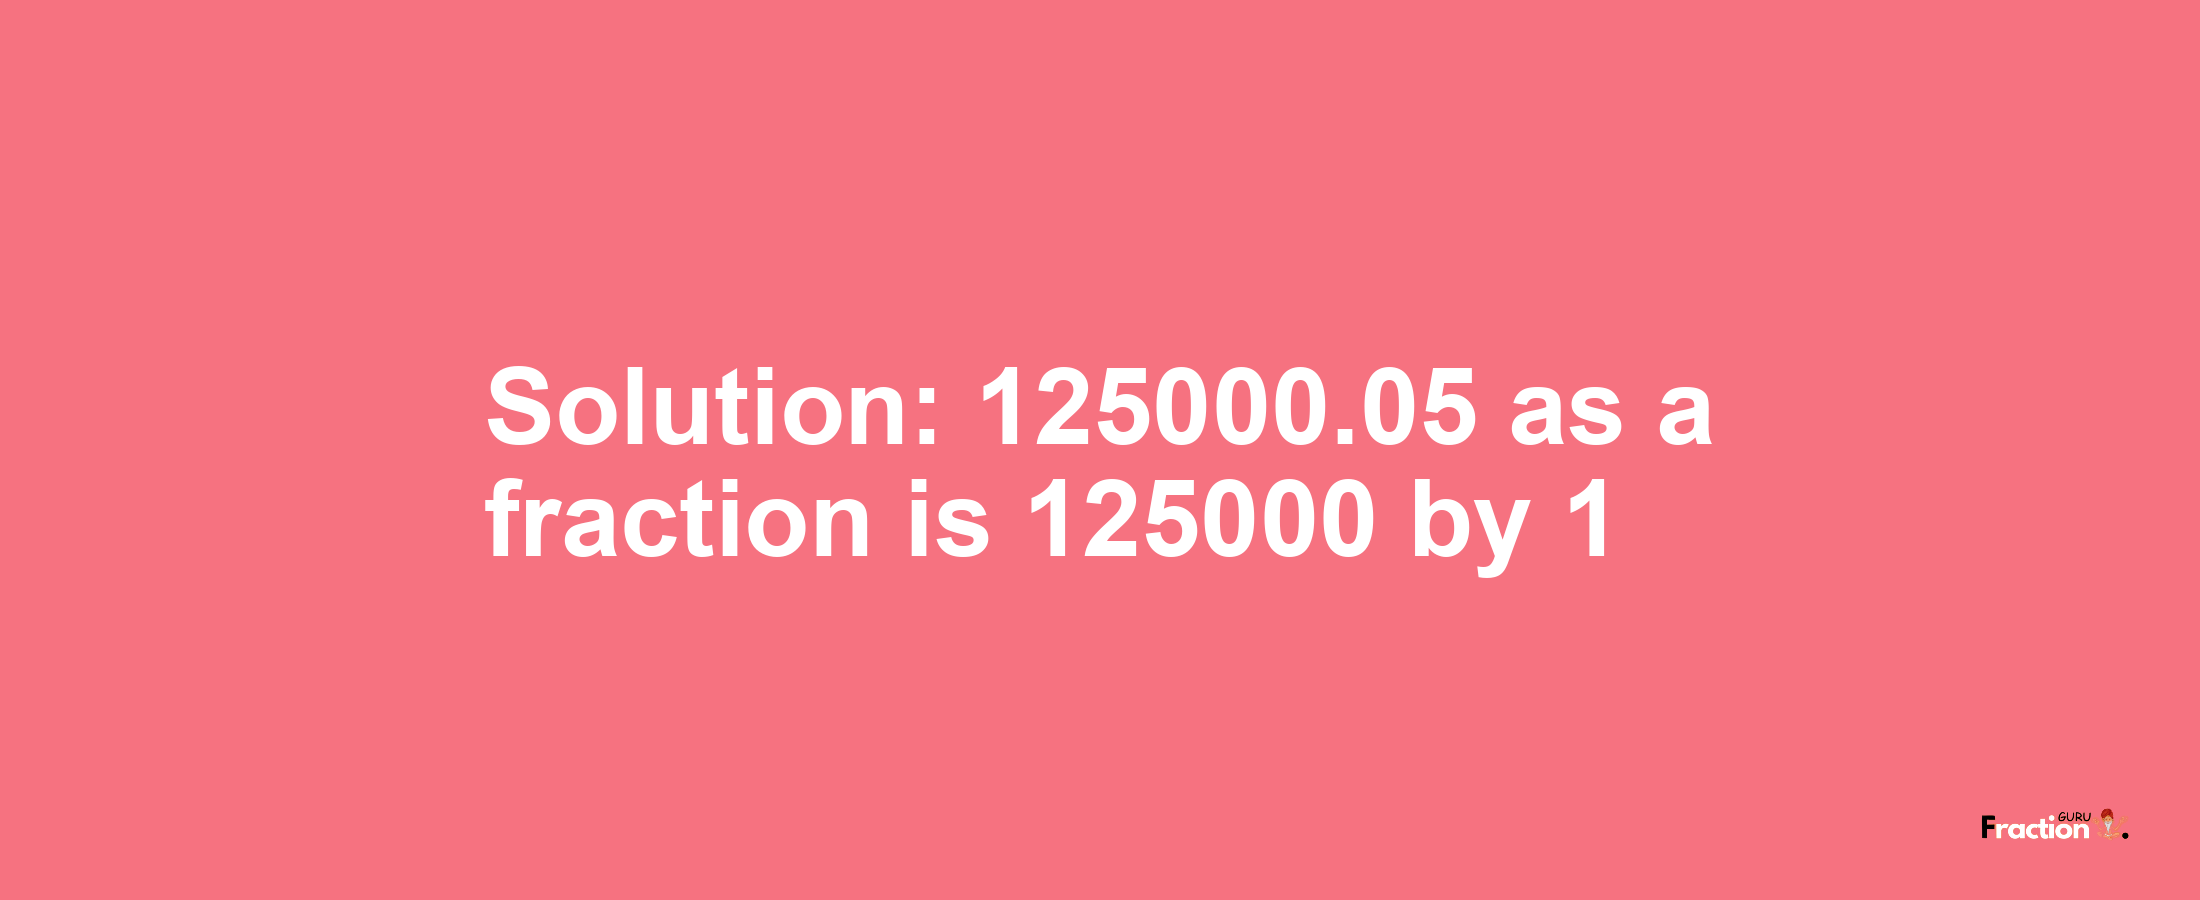 Solution:125000.05 as a fraction is 125000/1